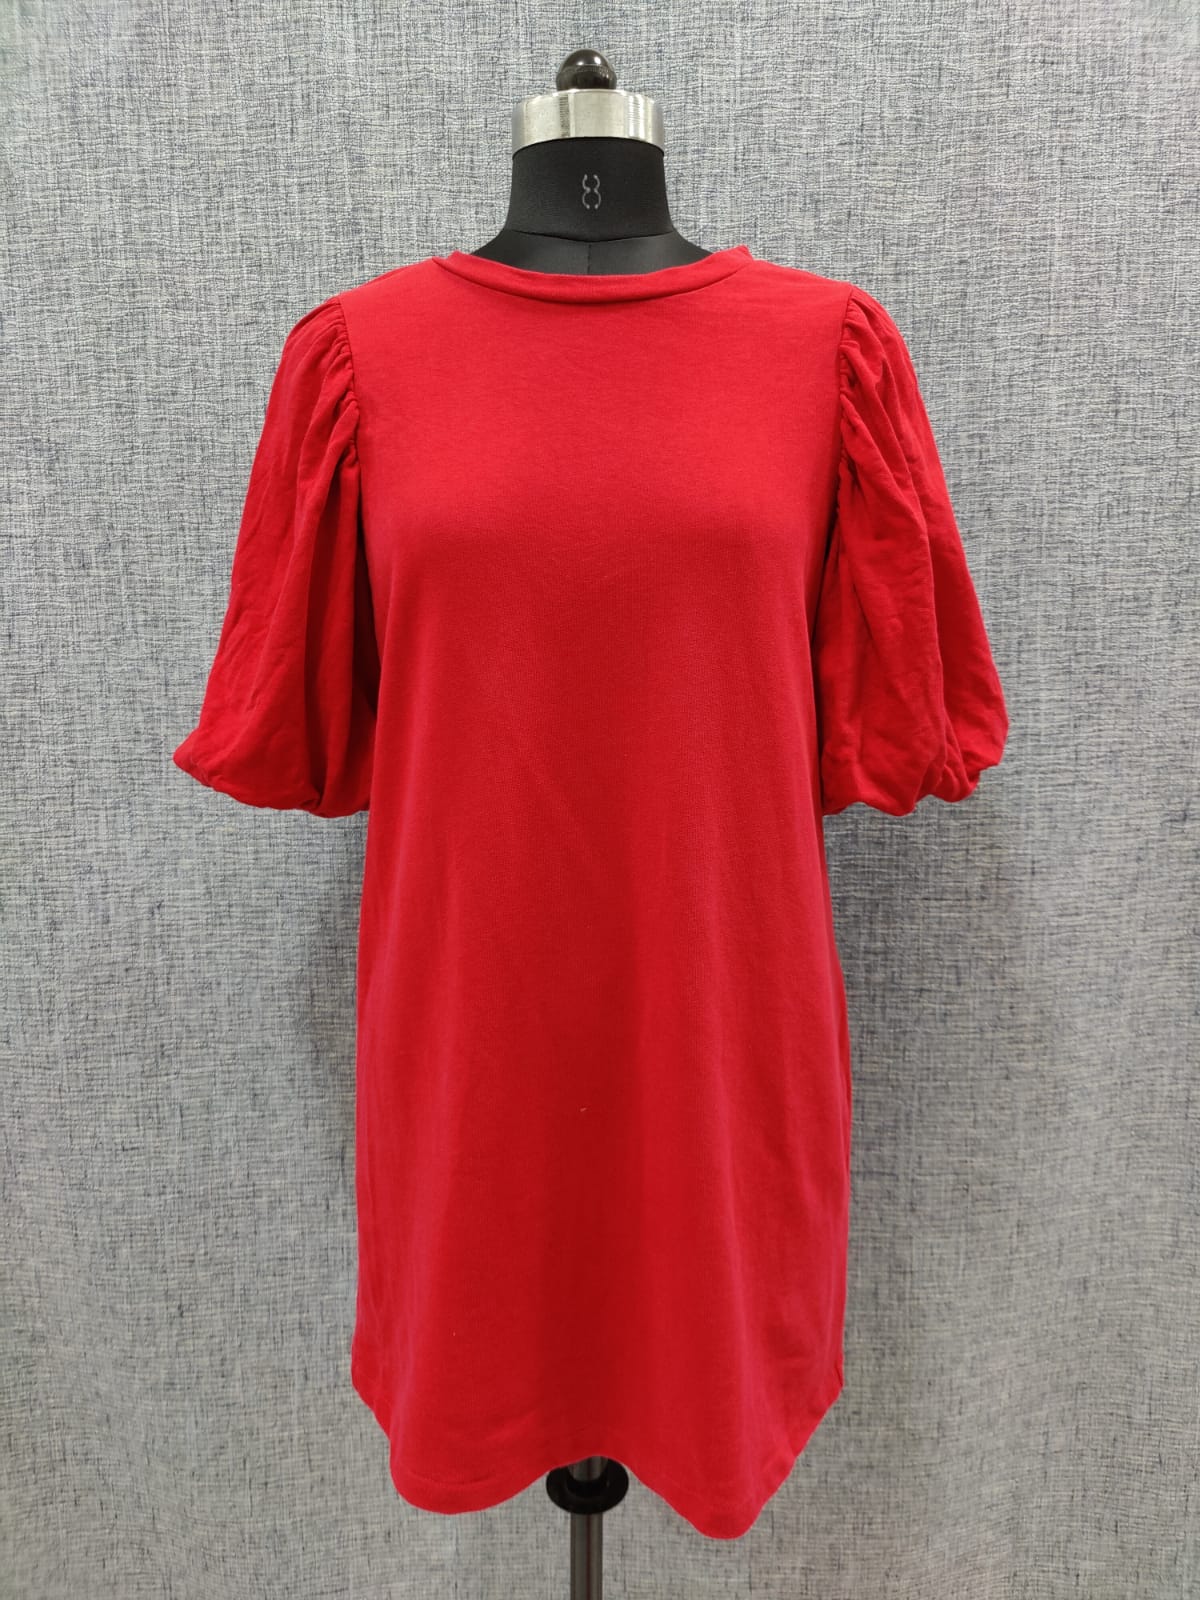 ZARA Red Puff Sleeves Top | Relove